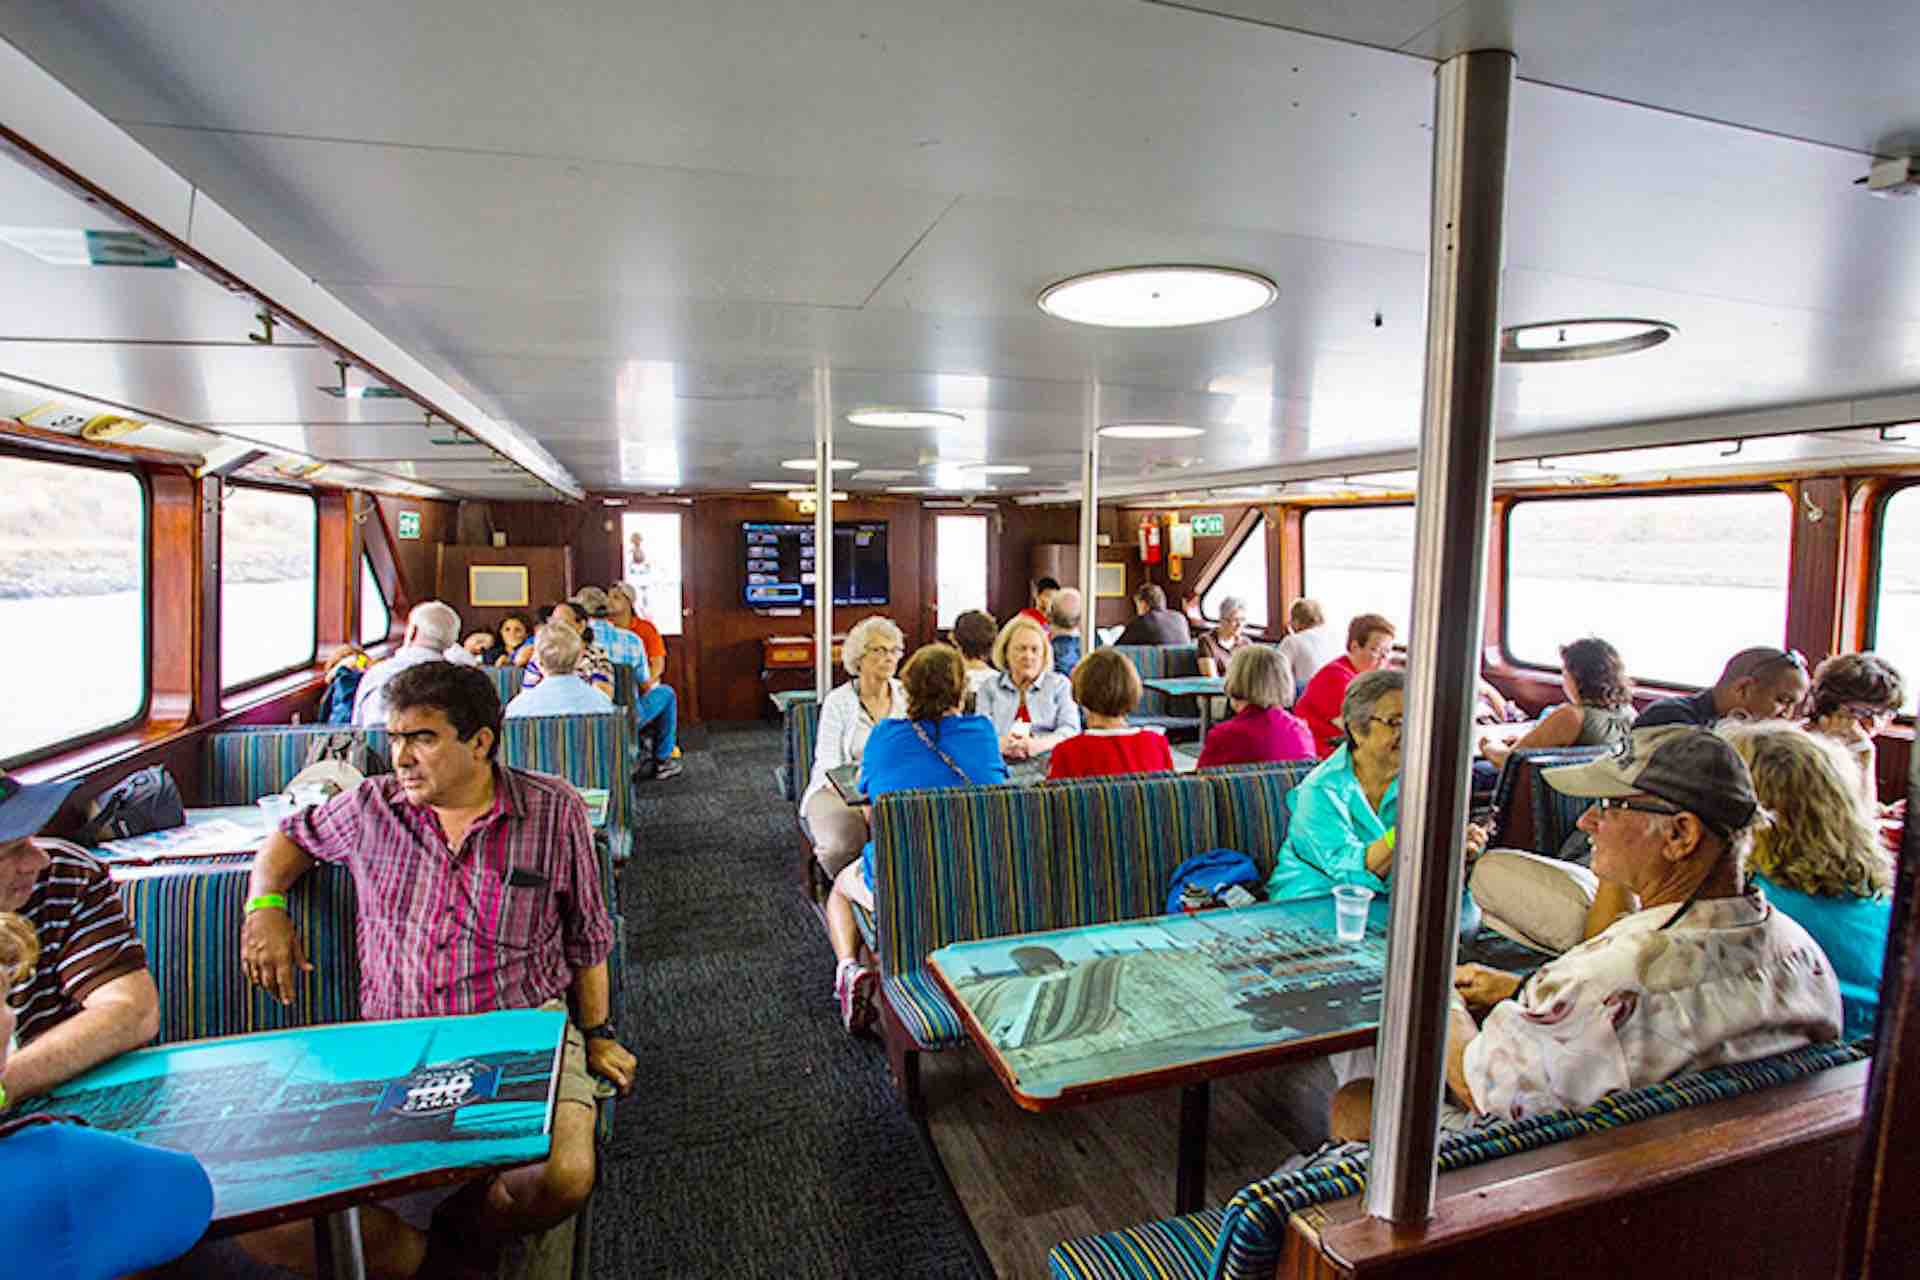 Pacific Queen Panama Canal Cruise boat interior with guests